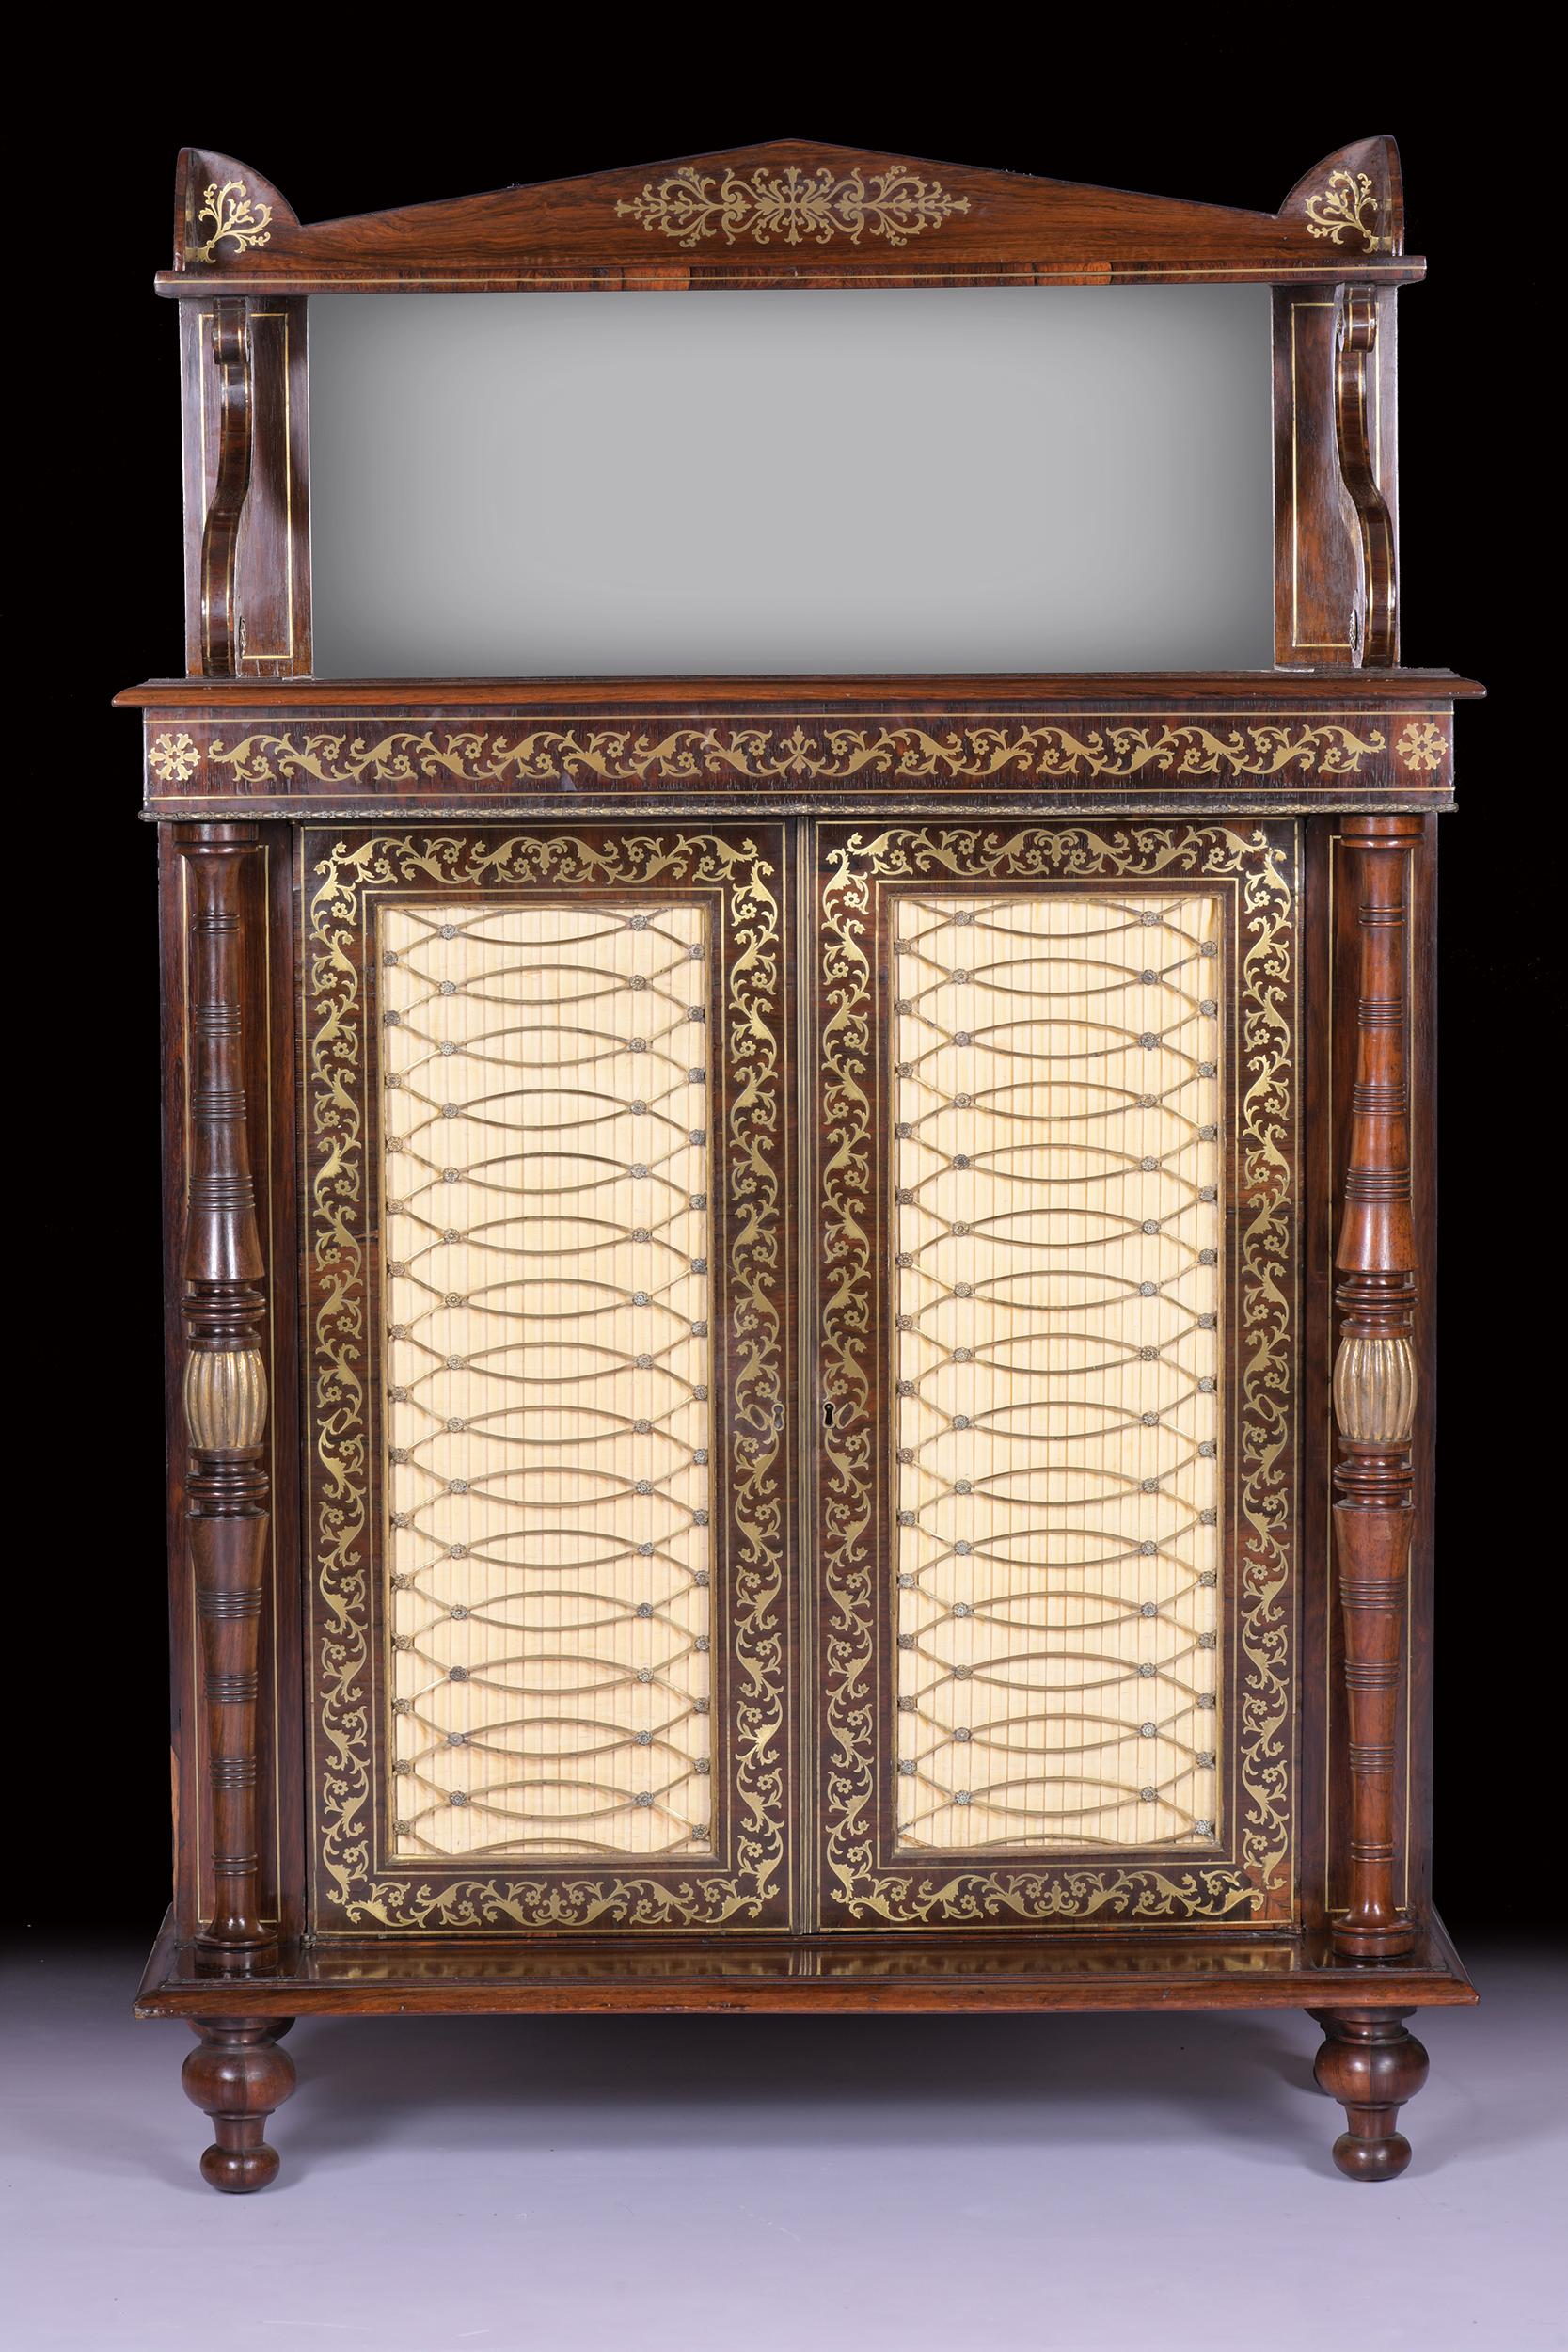 A Regency brass inlaid chiffonier inlaid with scrolling foliage and rosettes, the triangular pediment and conforming galleried shelf above a mirror inset panel, on S-scroll supports, over a pair of pleated material and interlacing brass grill inset